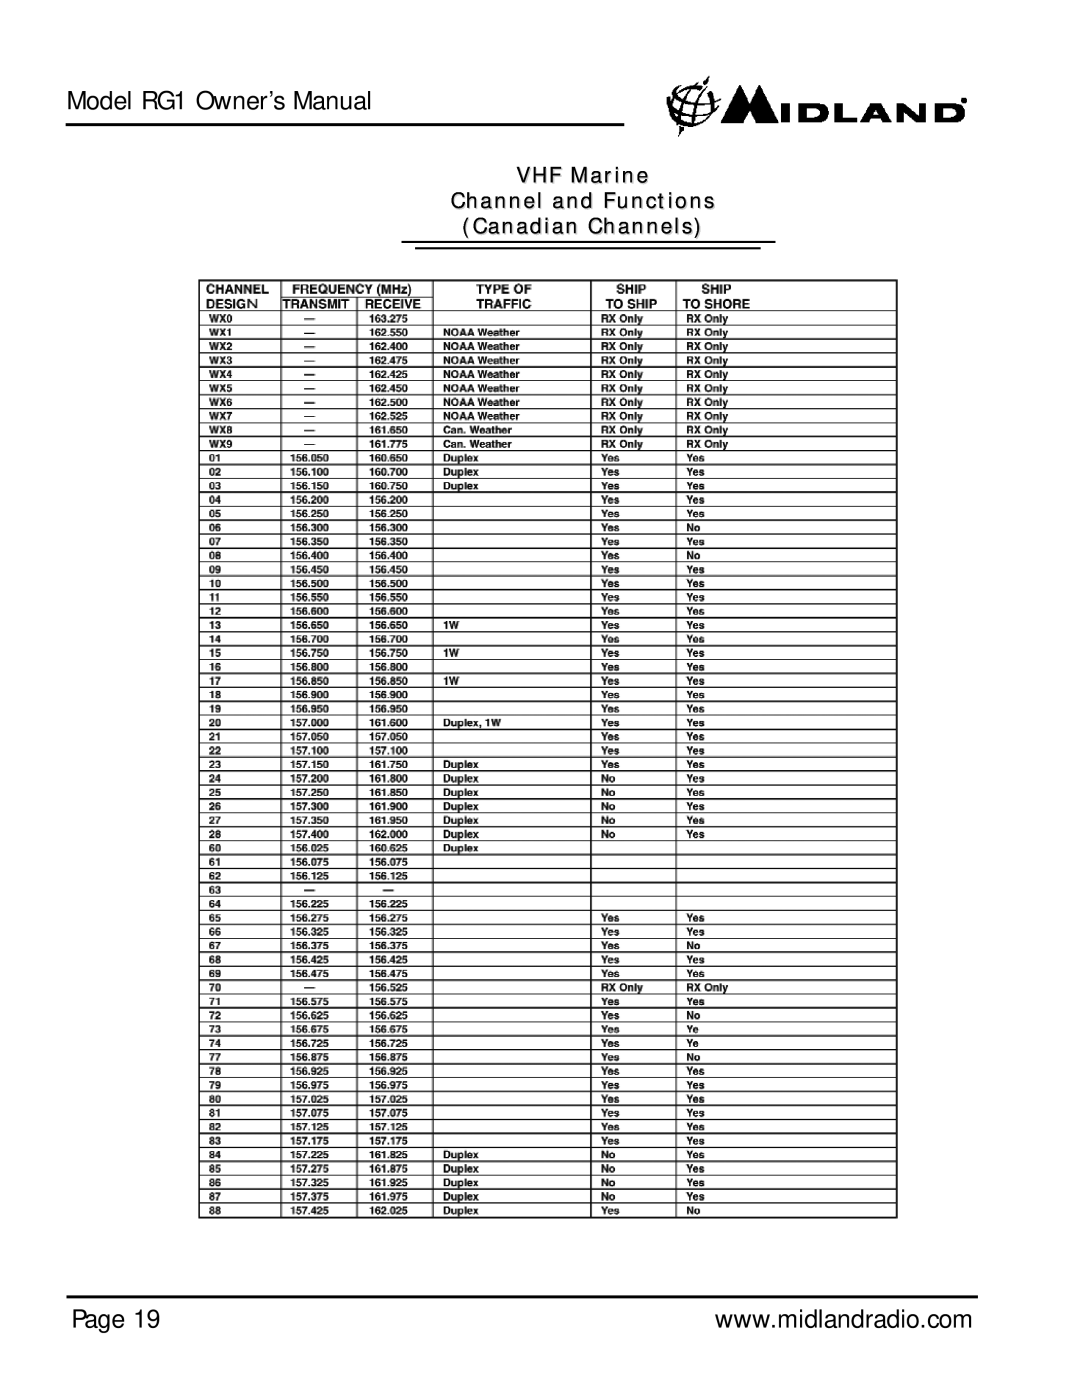 Midland Radio Regatta 1 owner manual Canadian Channels, Page, VHF Marine Channel and Functions 